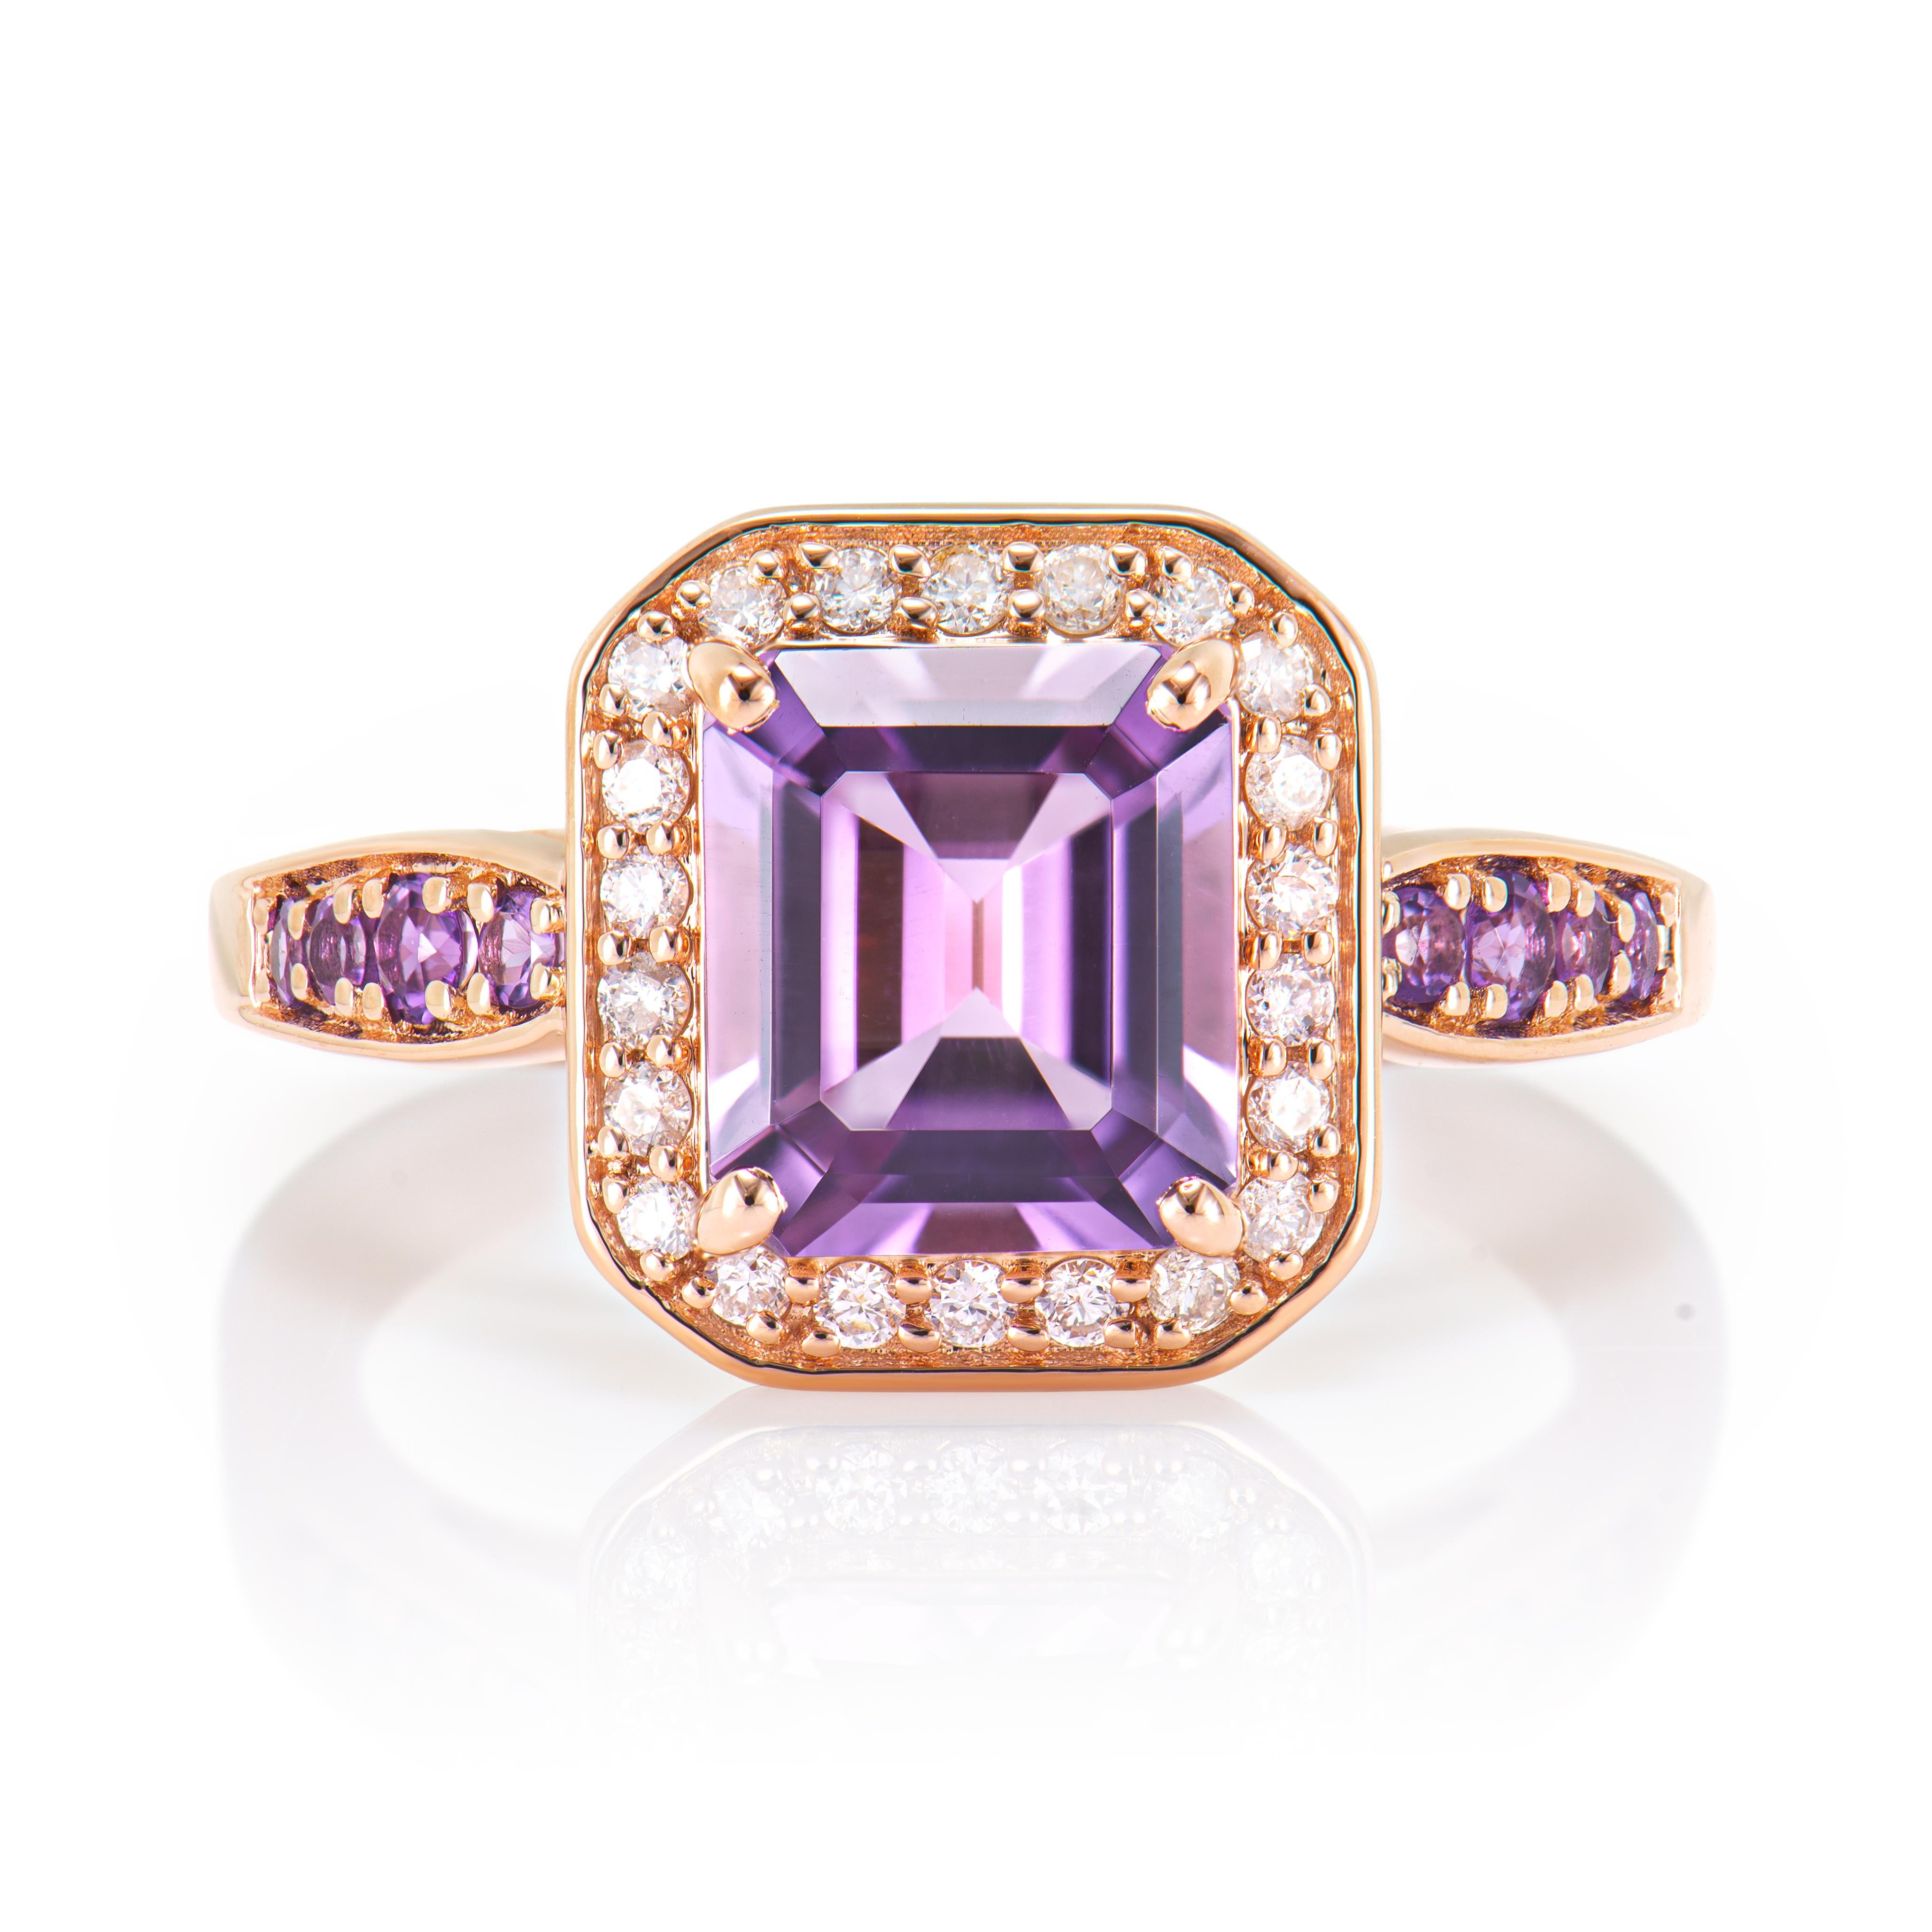 Contemporary 1.74 Carat Amethyst Fancy Ring in 14Karat Rose Gold with White Diamond.   For Sale